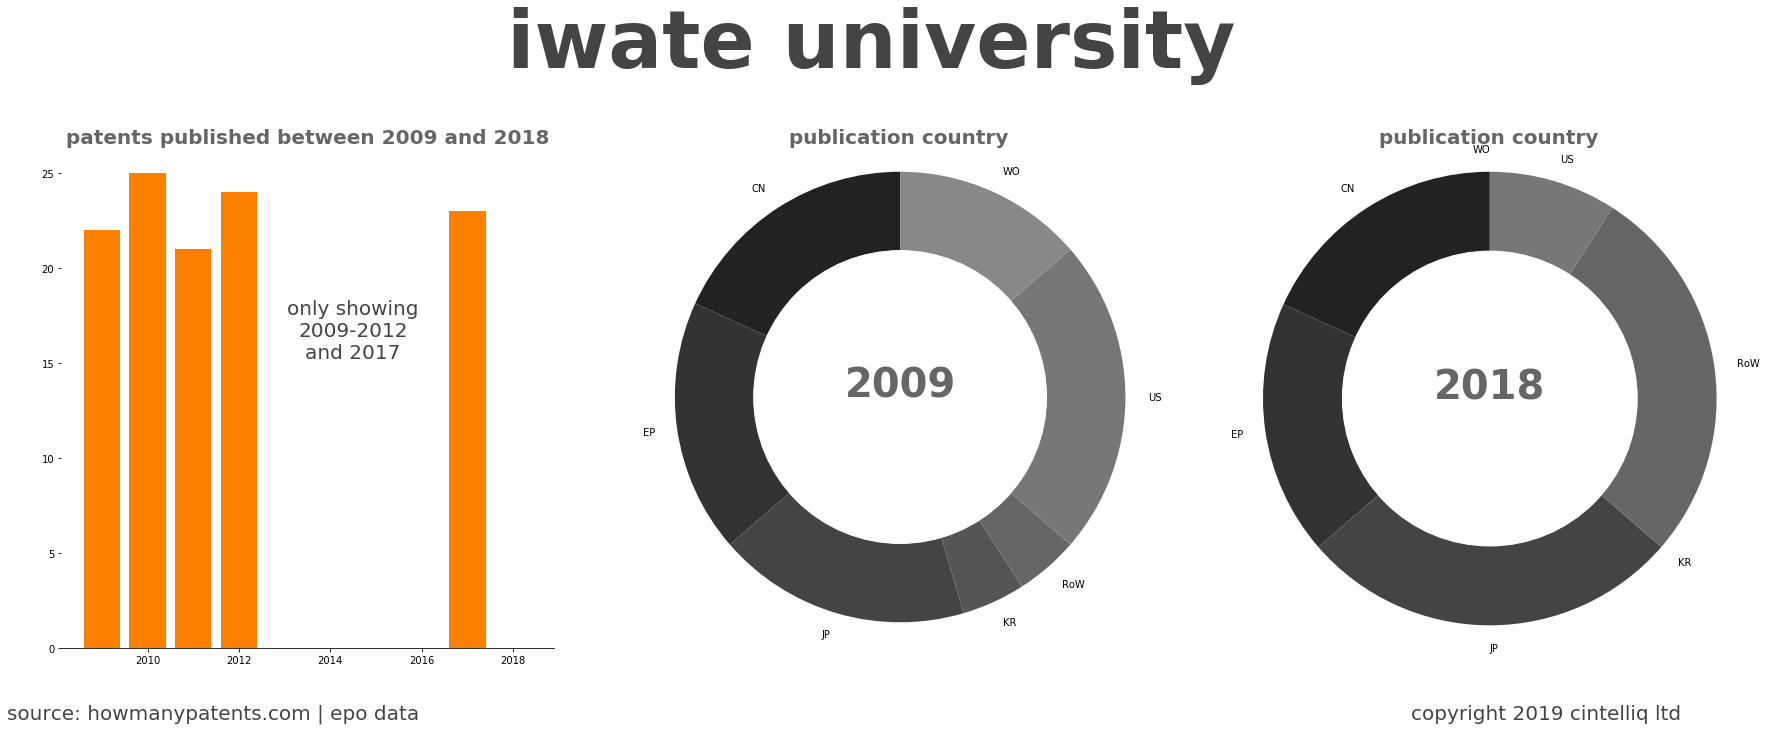 summary of patents for Iwate University